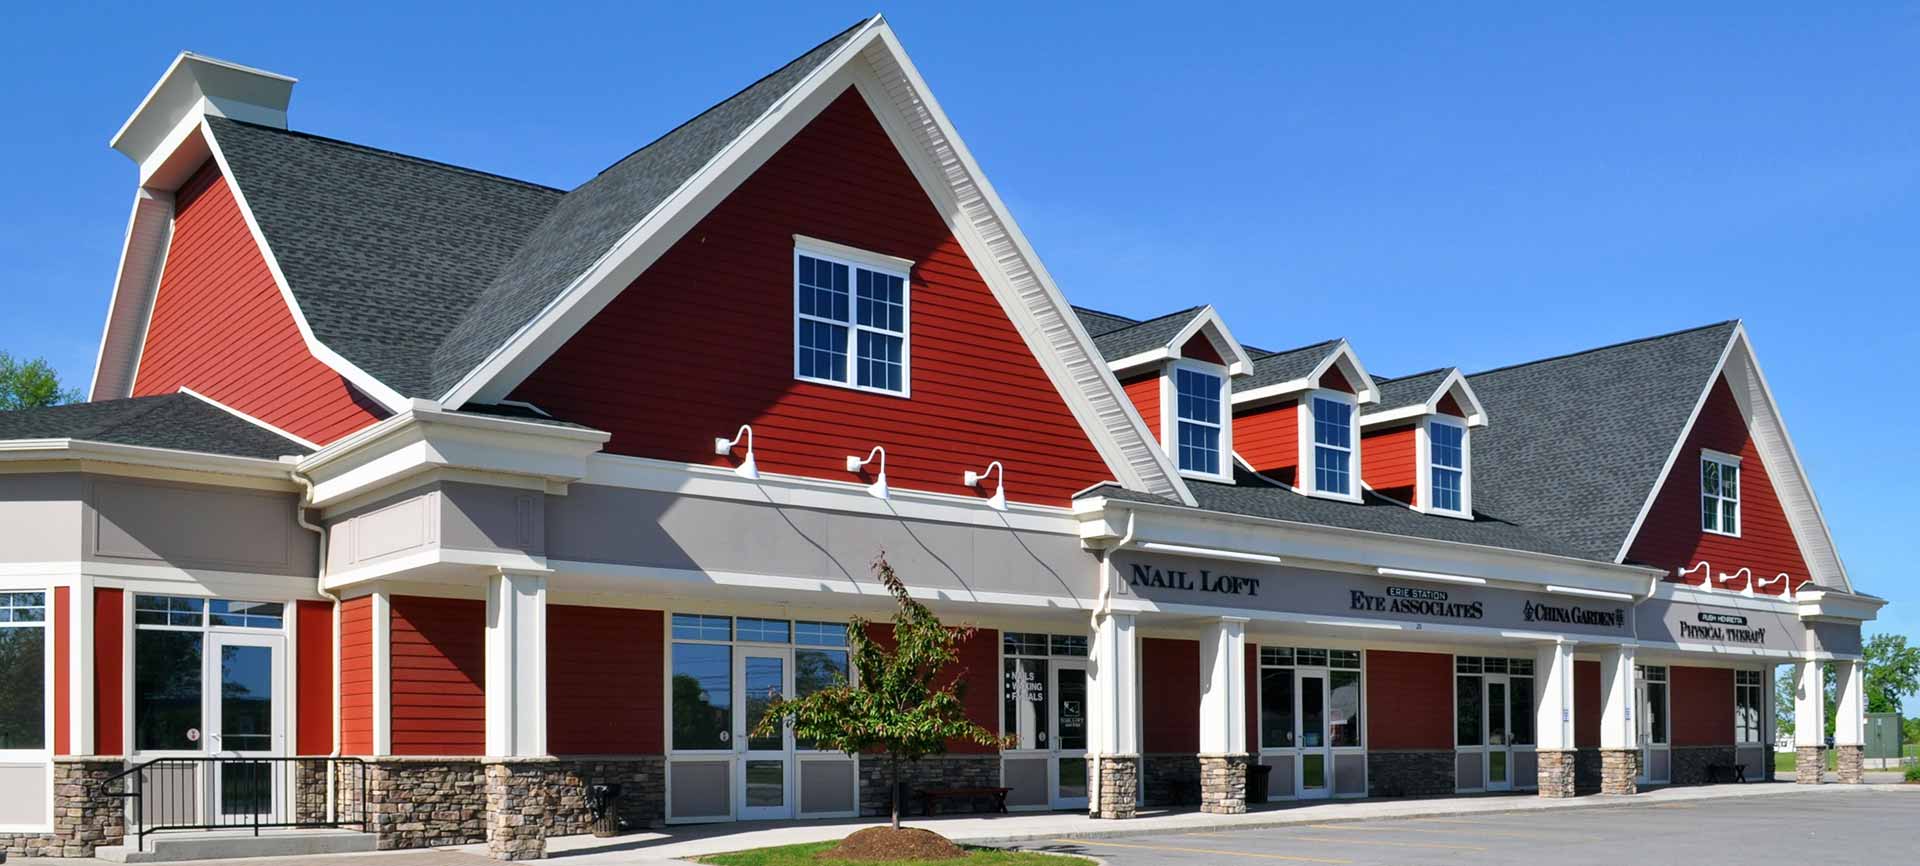 Erie Station West Henrietta, an attractive and timeless mix of retail and office space